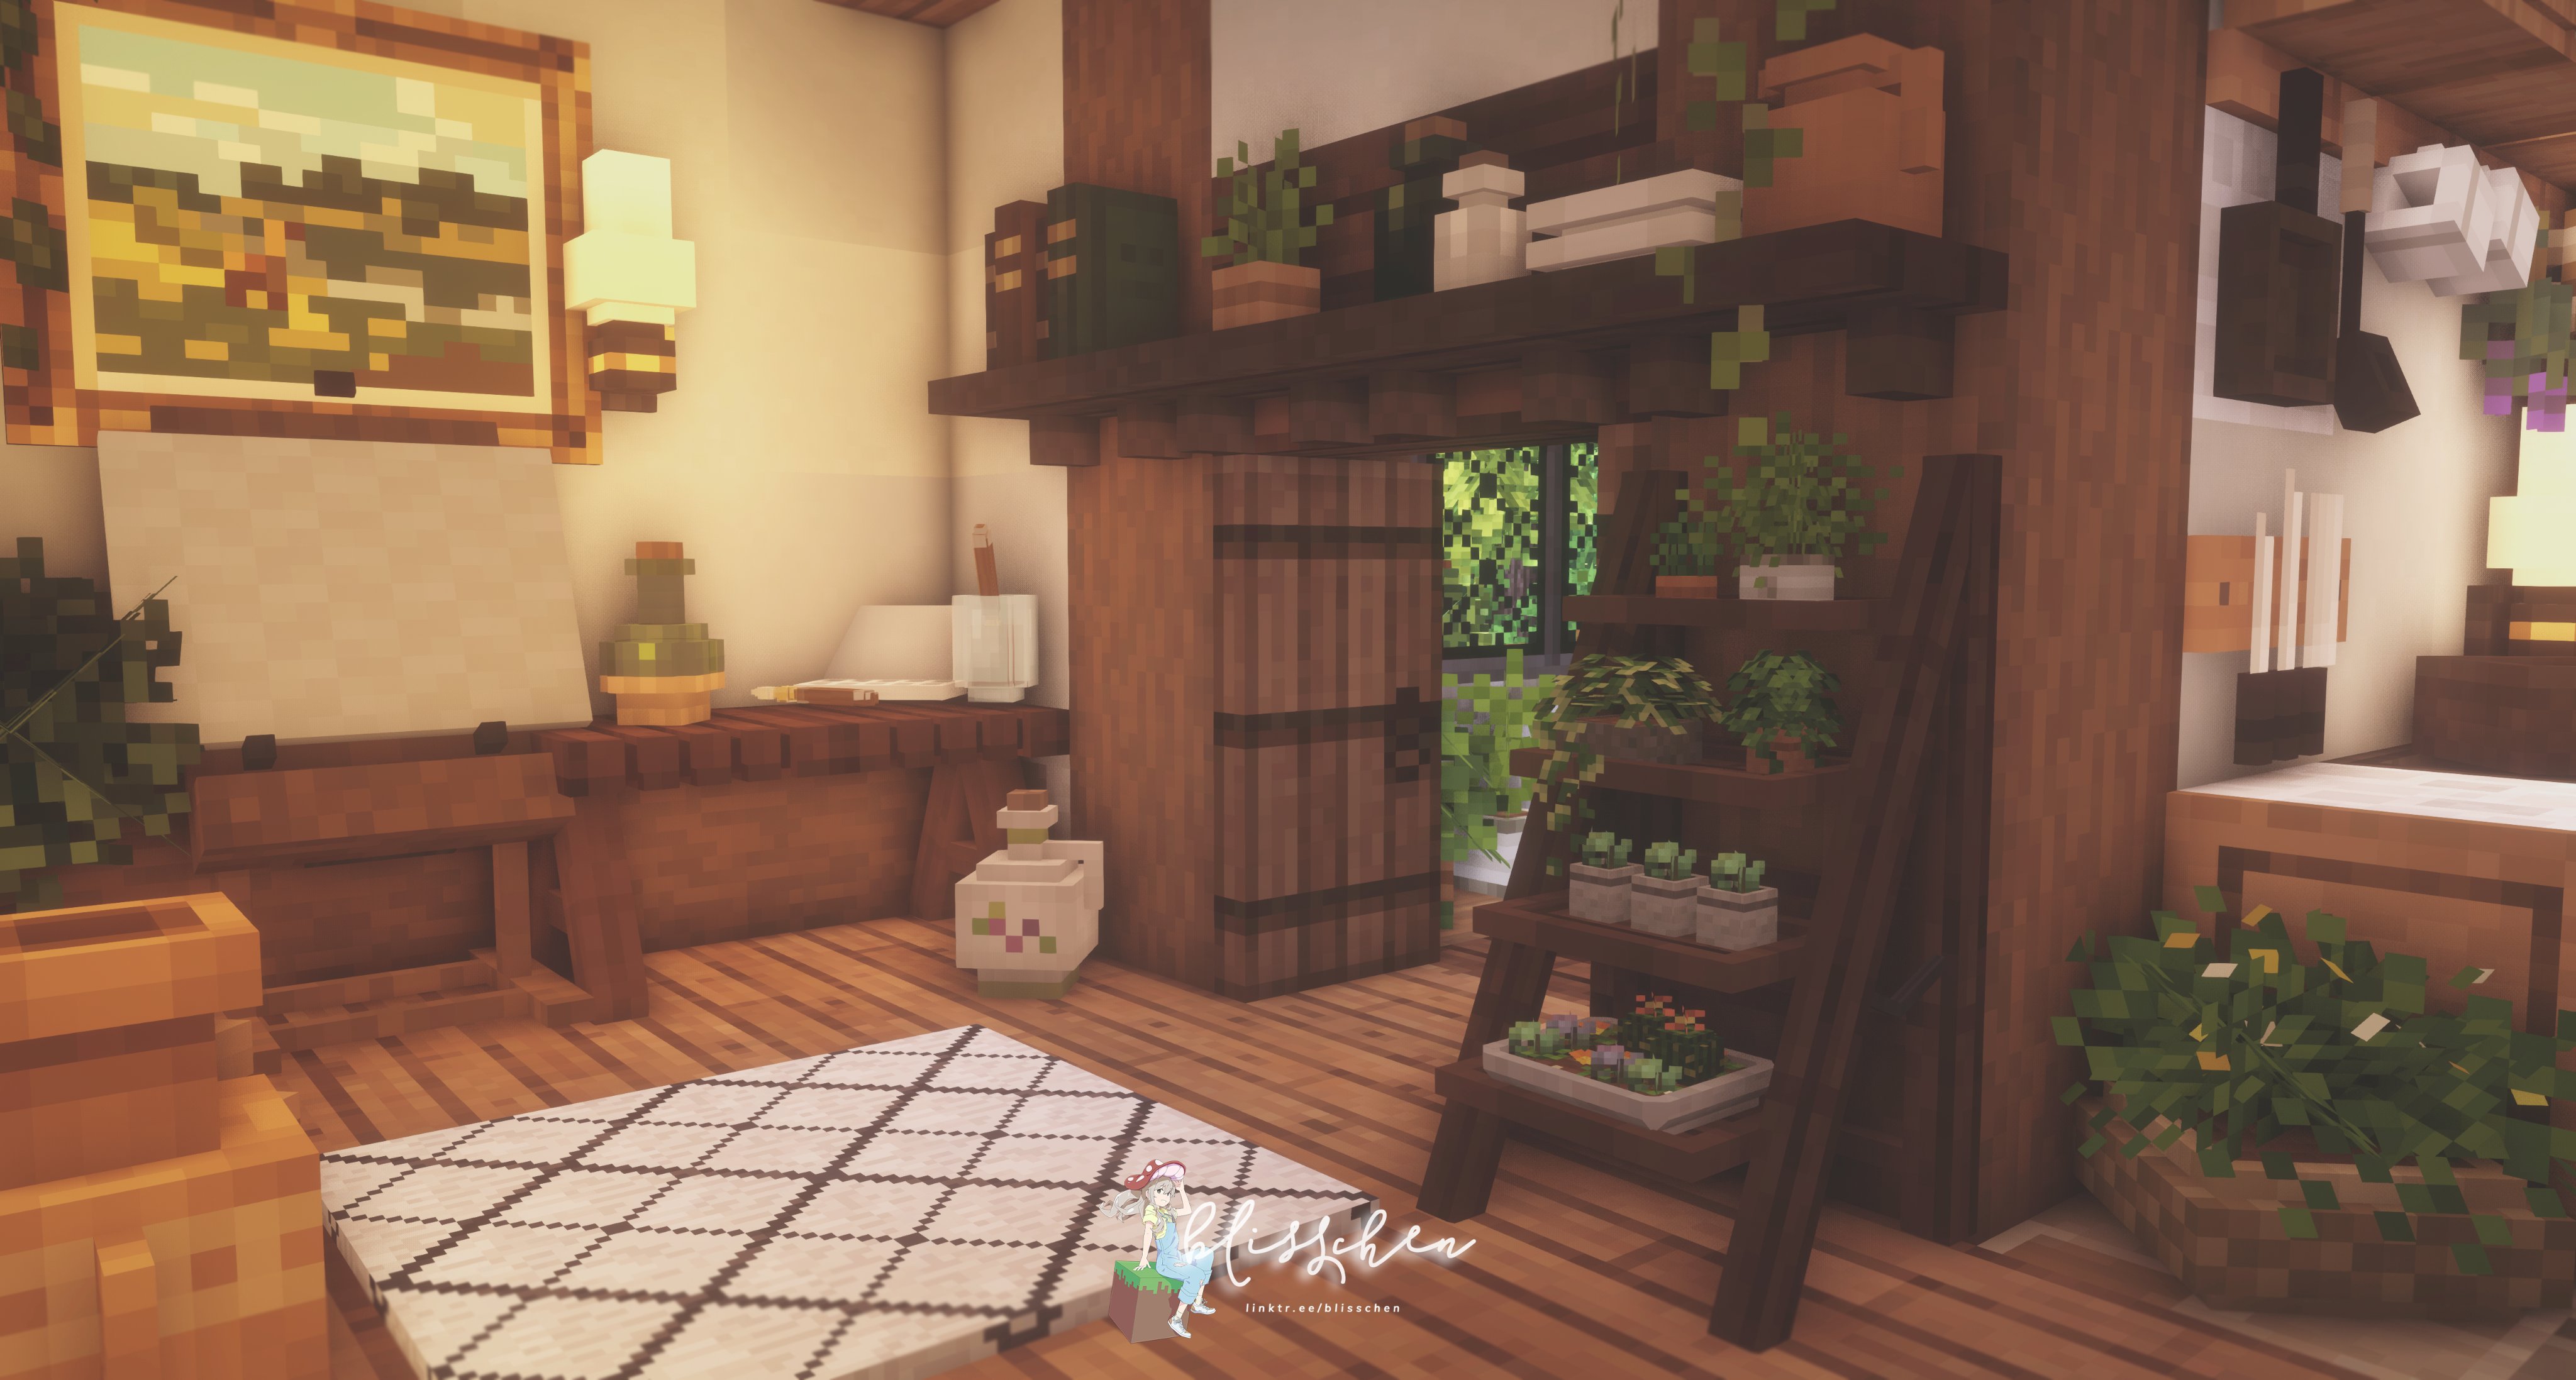 I decorated the interior of my most recent cottage core Minecraft